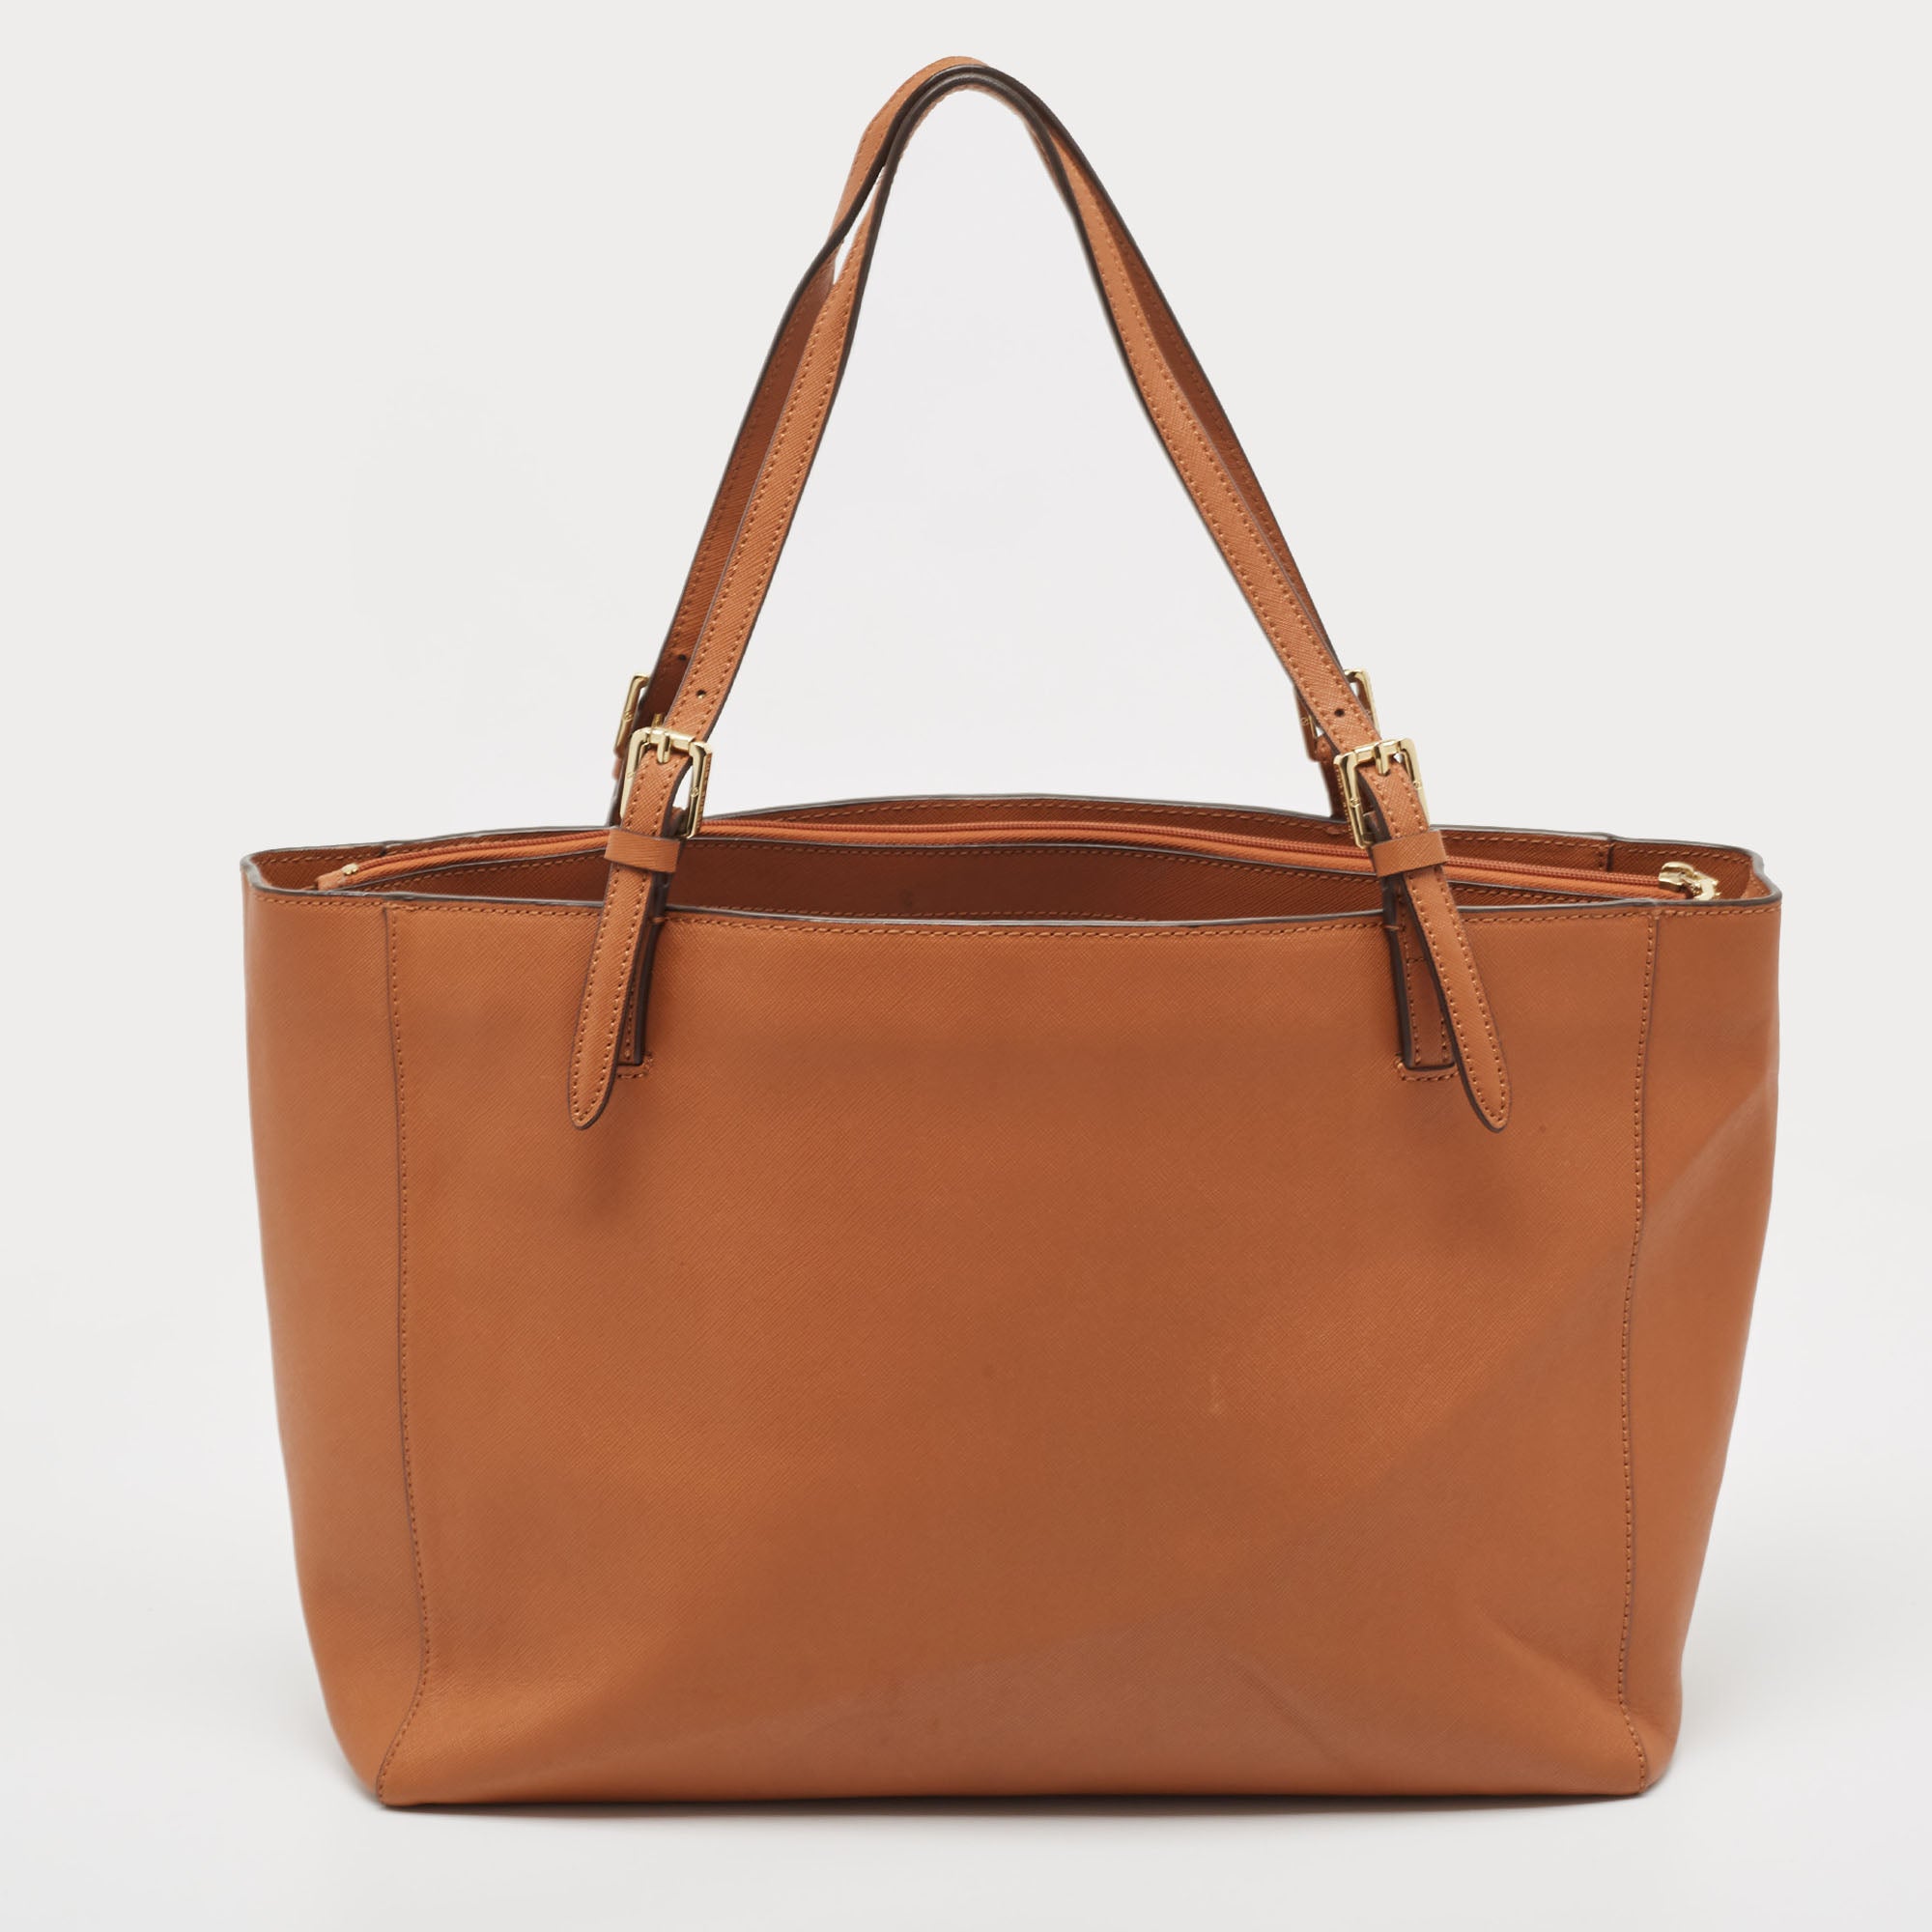 Tory Burch Brown McGraw Leather Tote Bag - ShopStyle